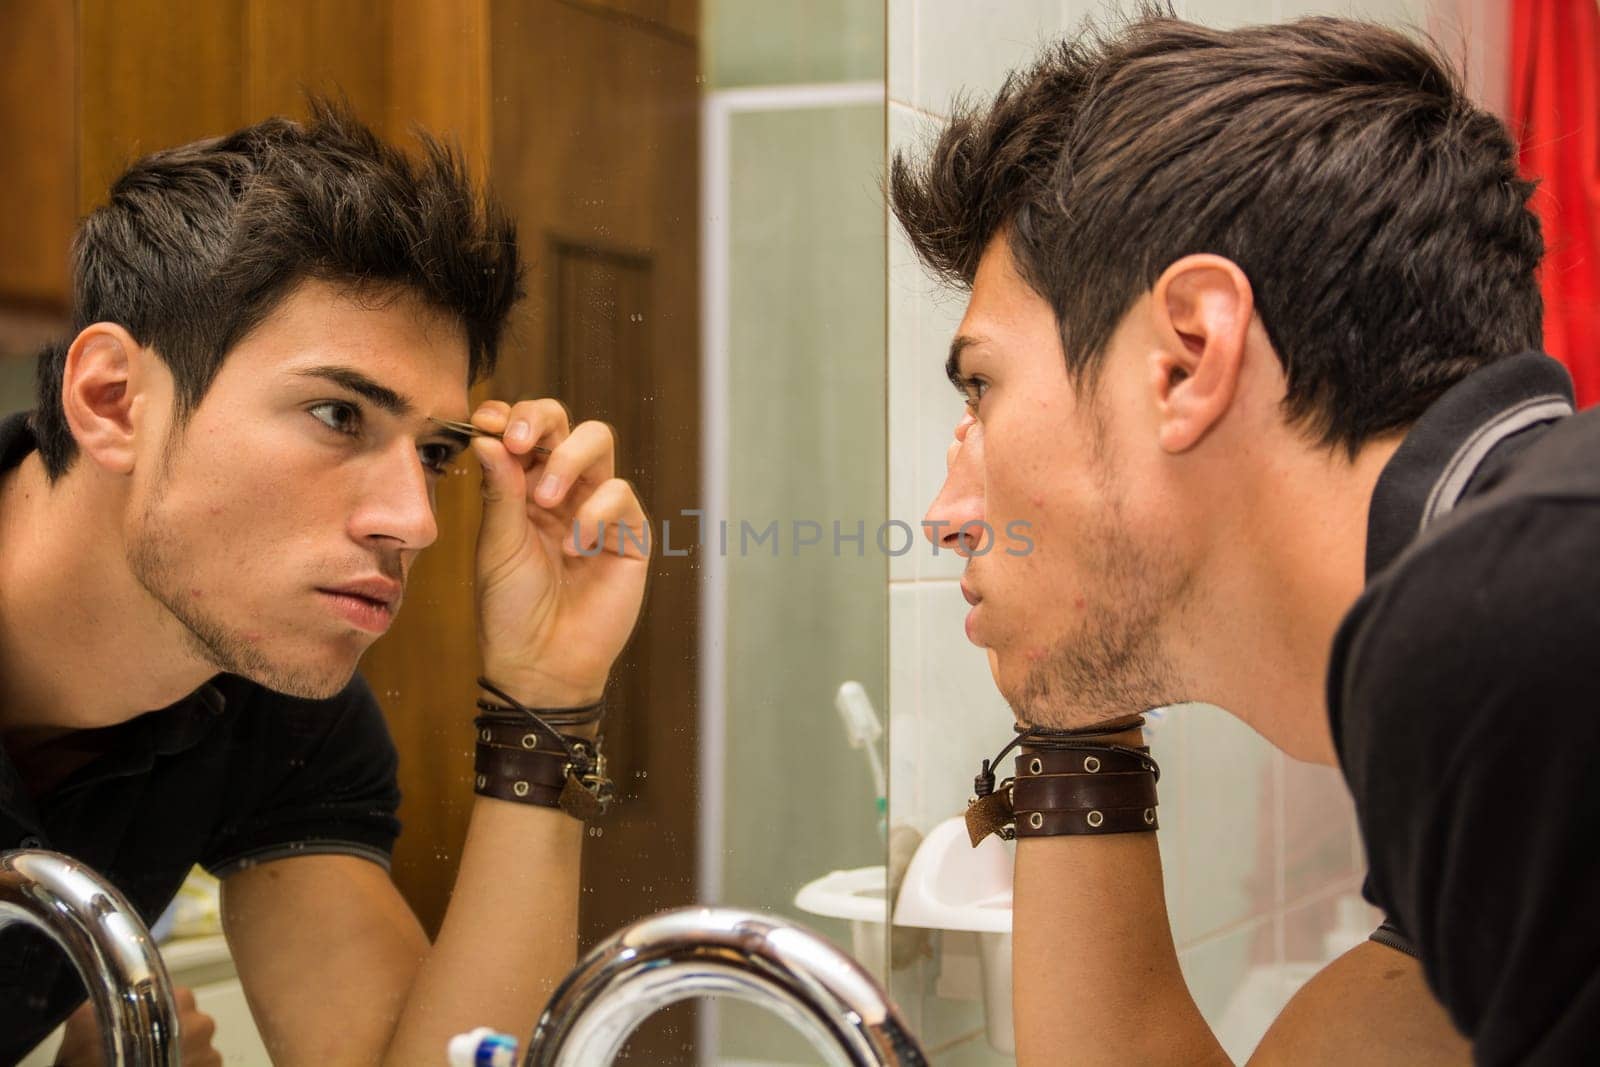 A Man Plucking Eyebrows in Front of a Mirror by artofphoto